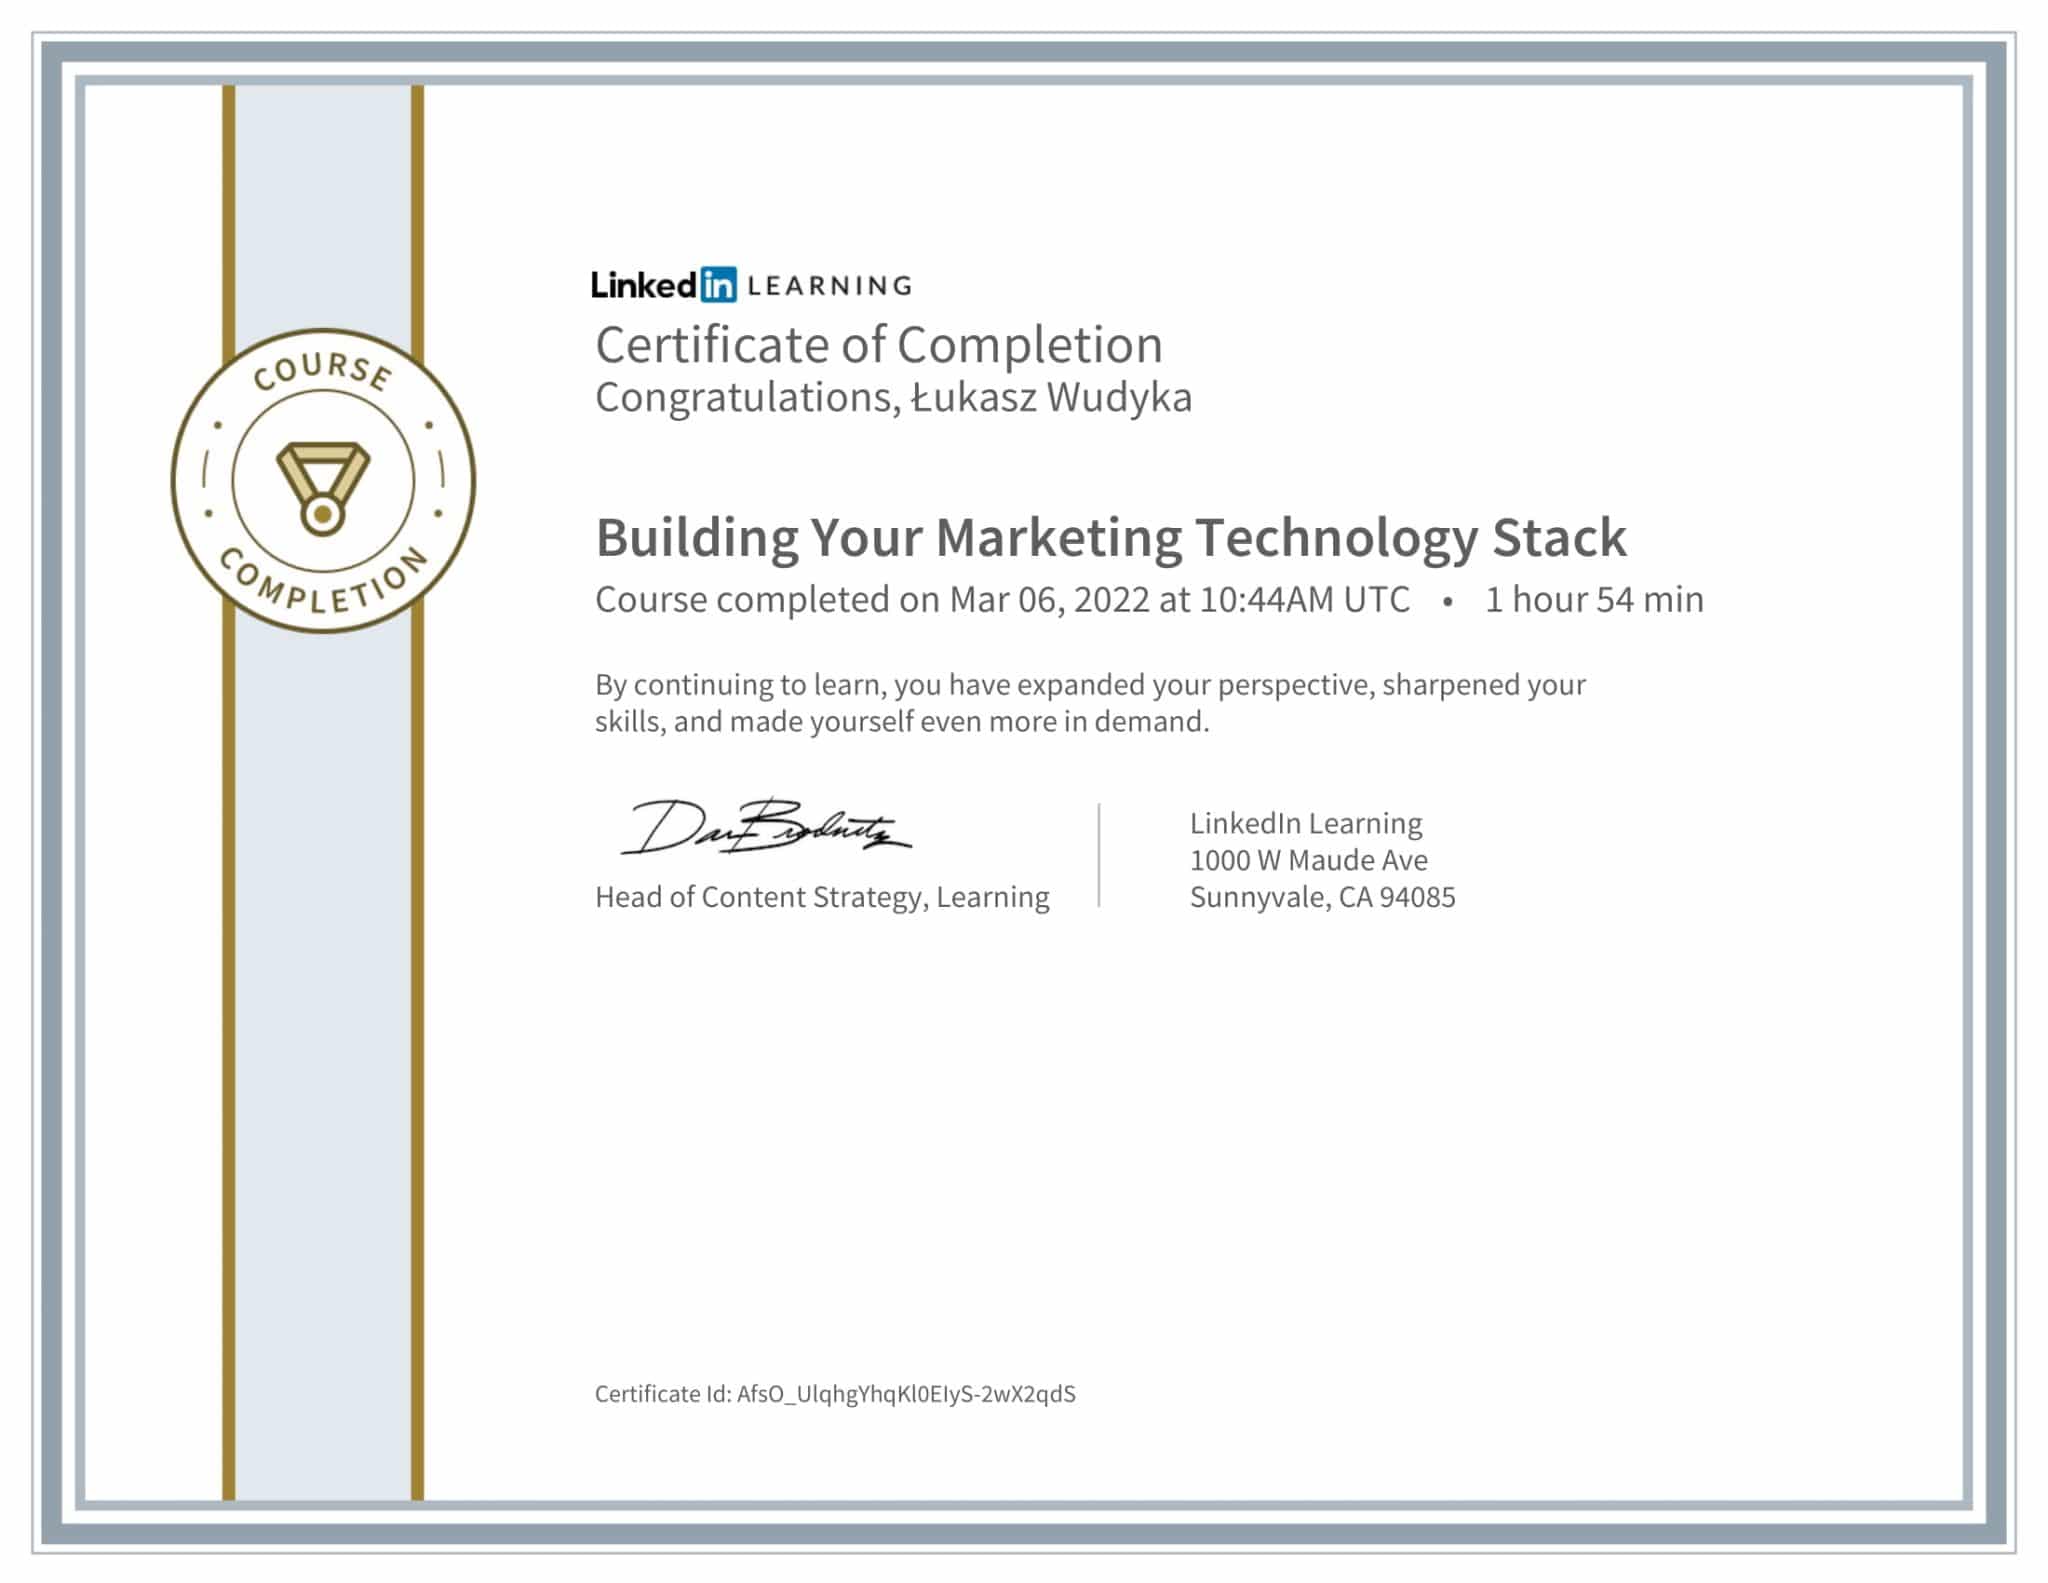 CertificateOfCompletion_Building Your Marketing Technology Stack-1